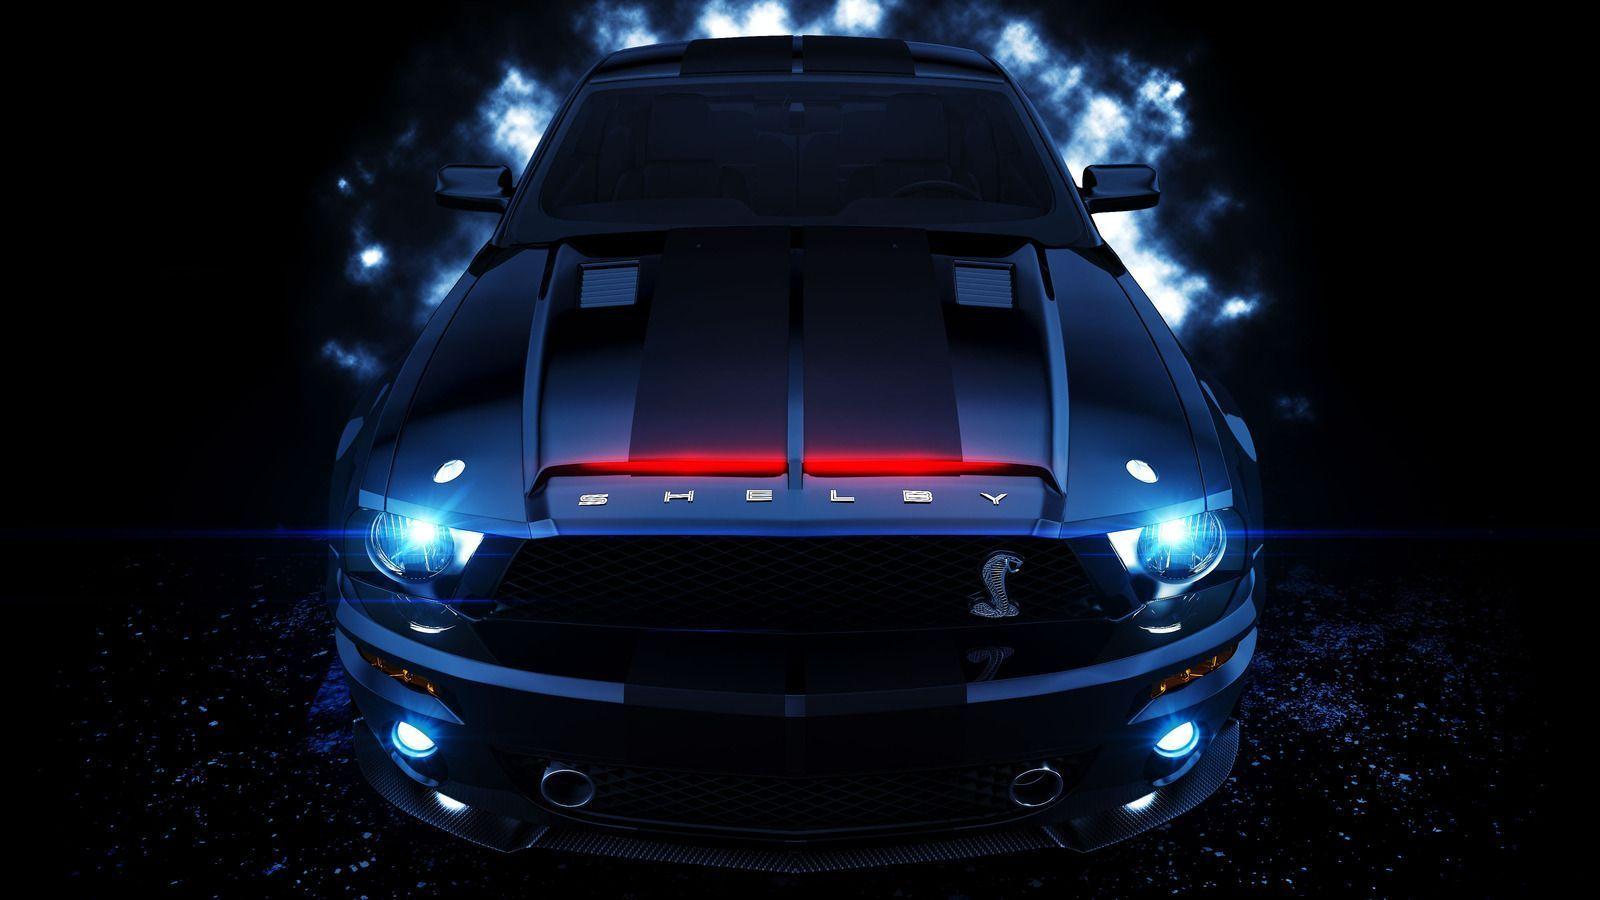 Neon Ford Mustang Wallpaper Picture Wallpaper. High